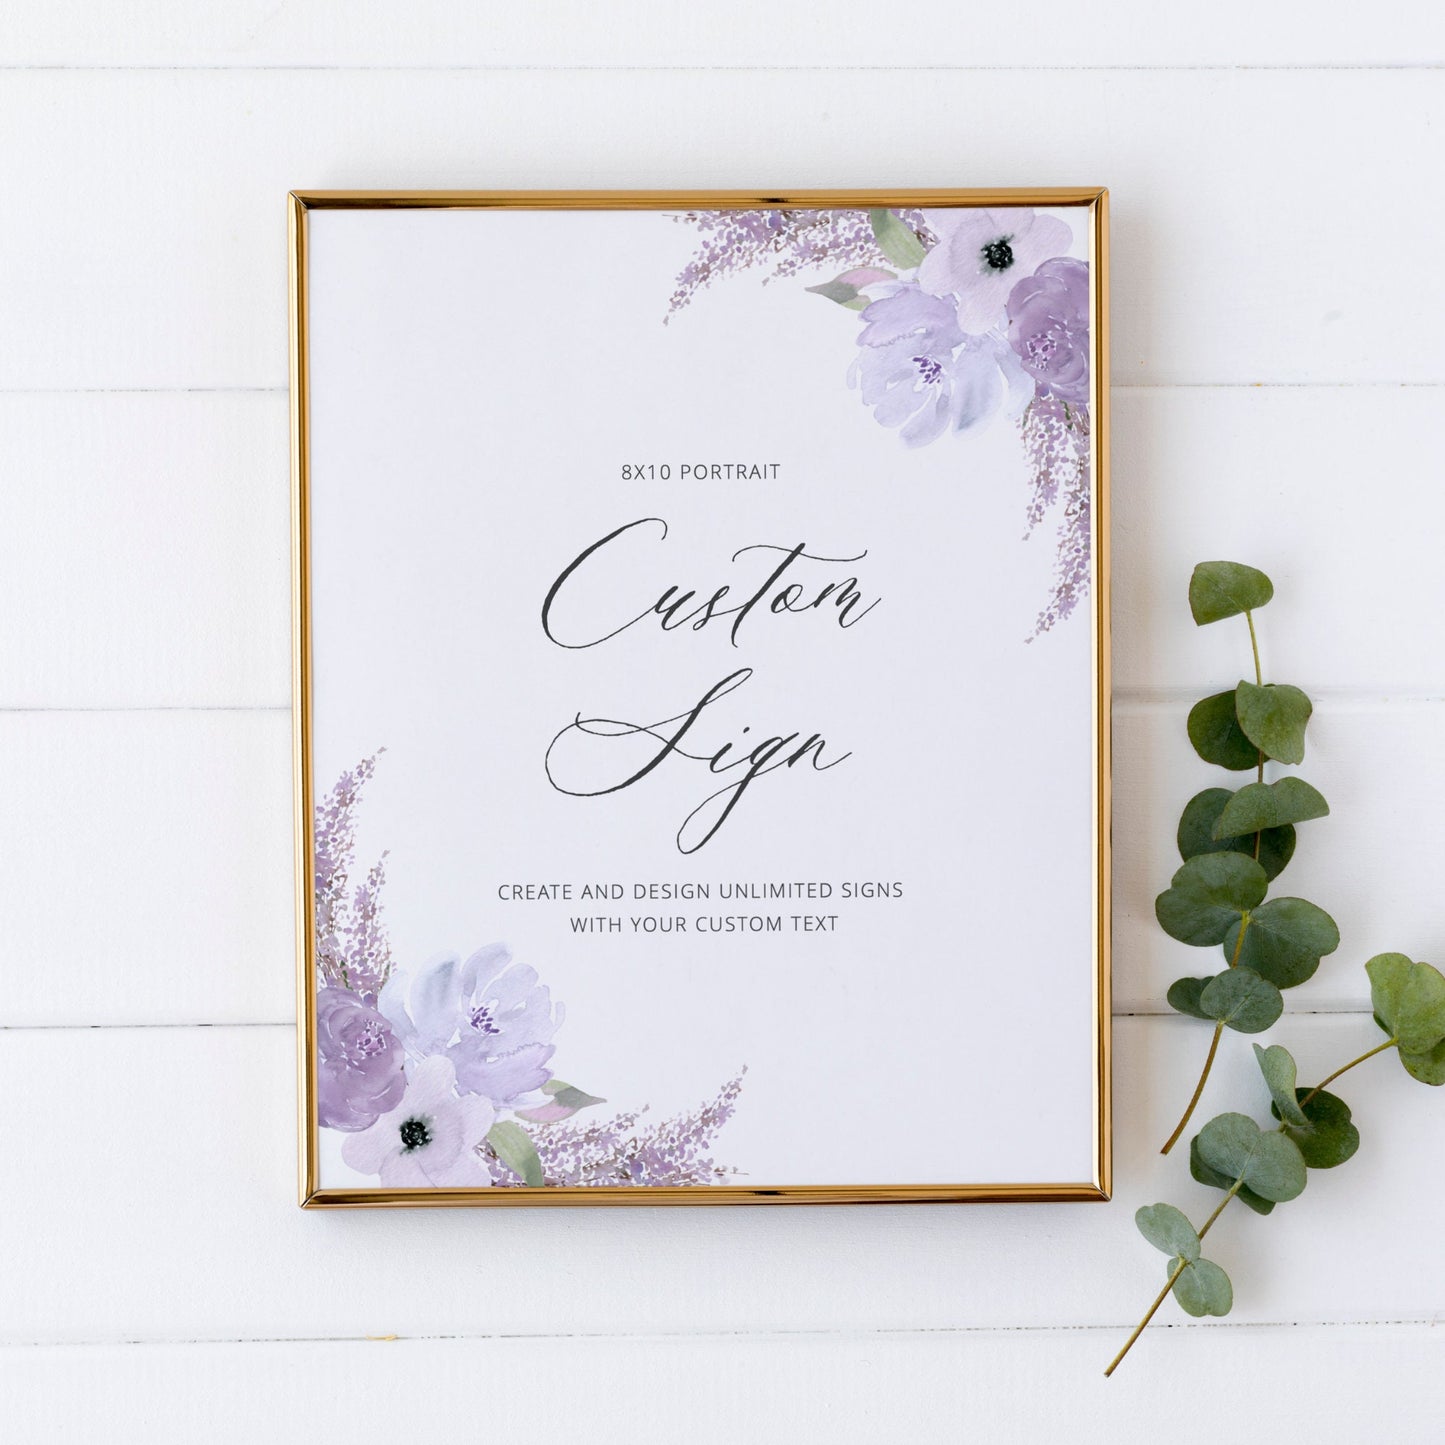 Editable Custom Wedding Sign Floral Lavender Wedding Sign Kit Create Unlimited Signs 8x10 and 10x8 Template